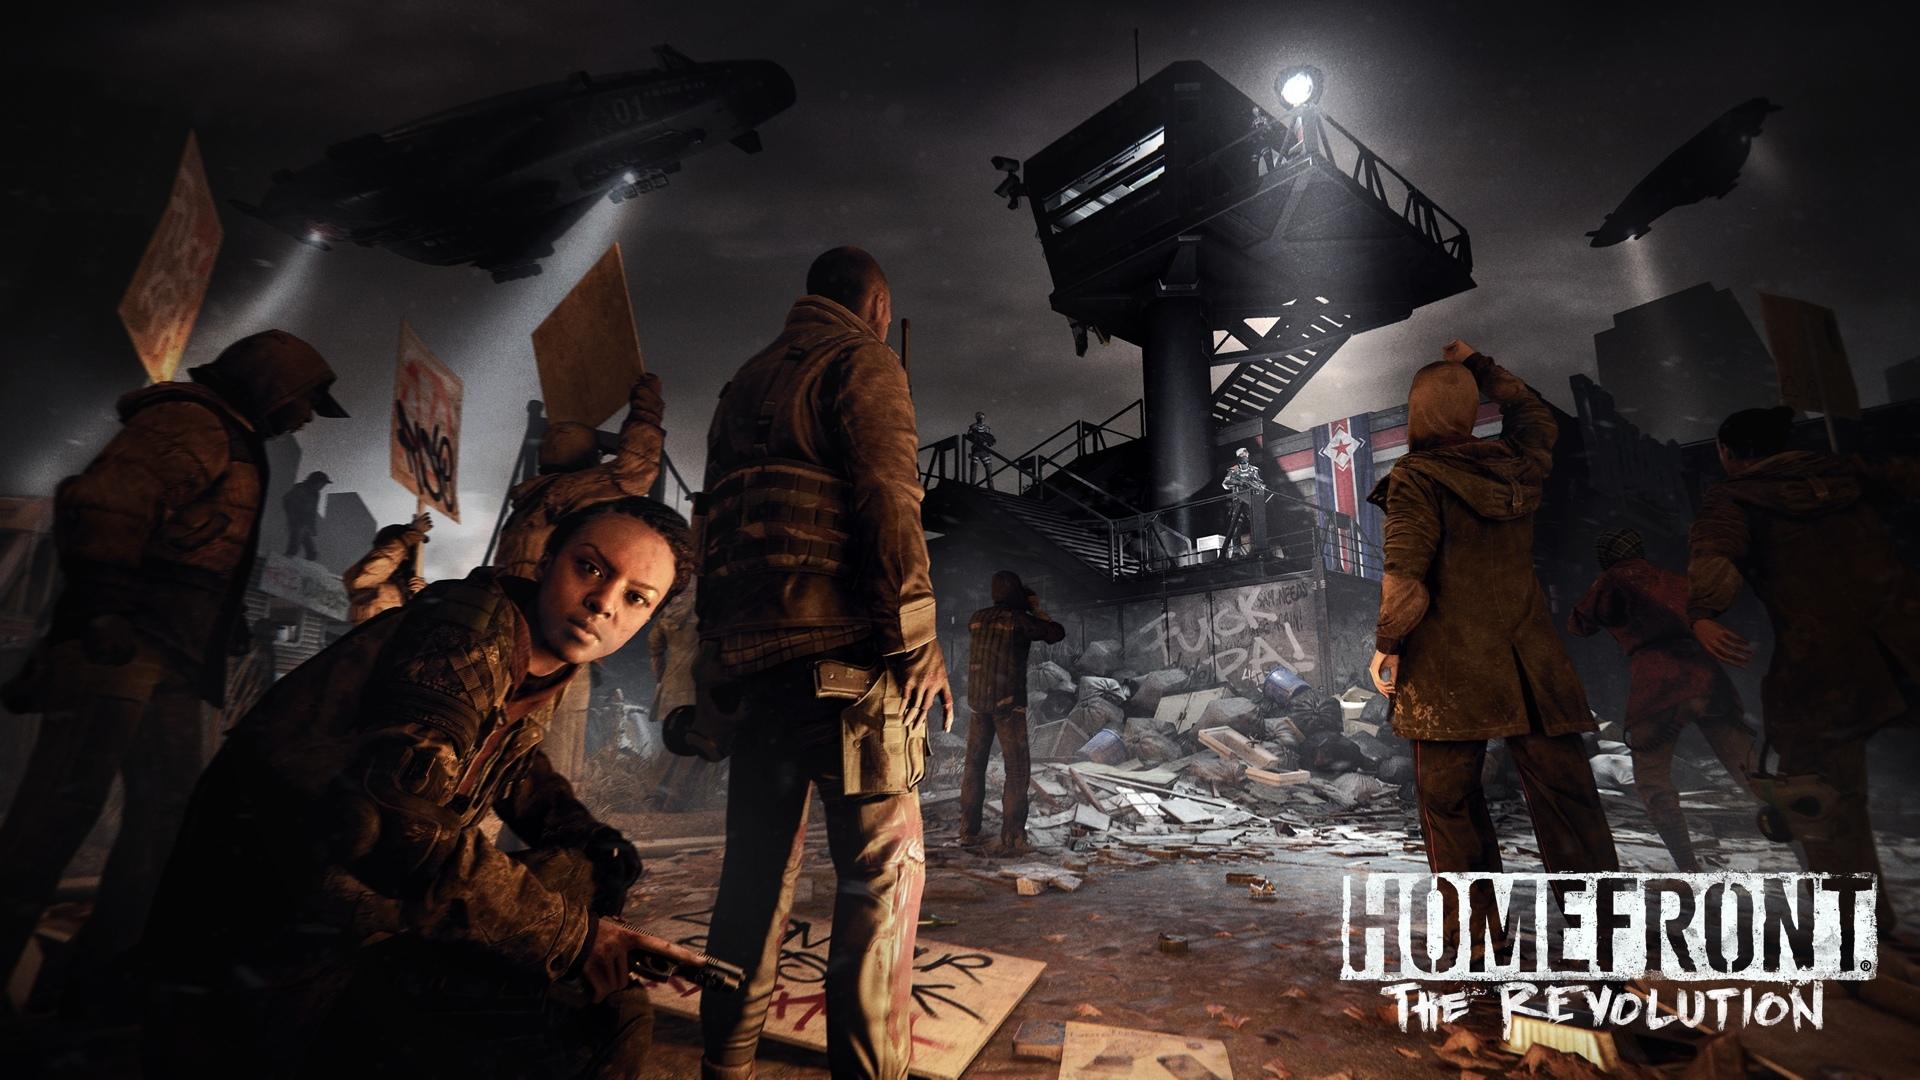 download homefront 3 for free